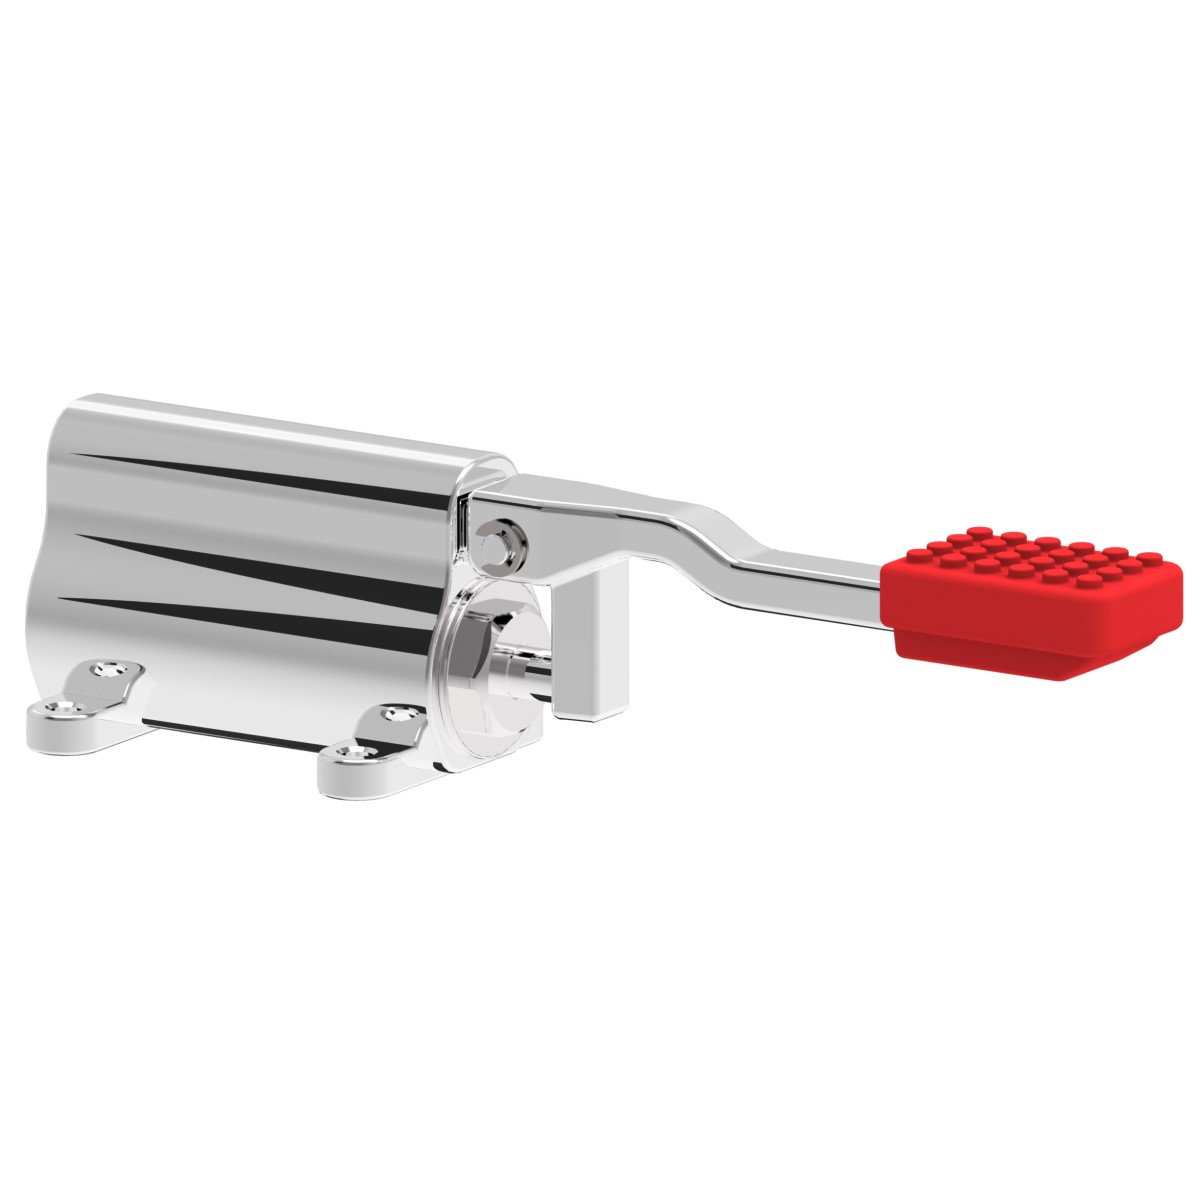 Foot operated mixer tap